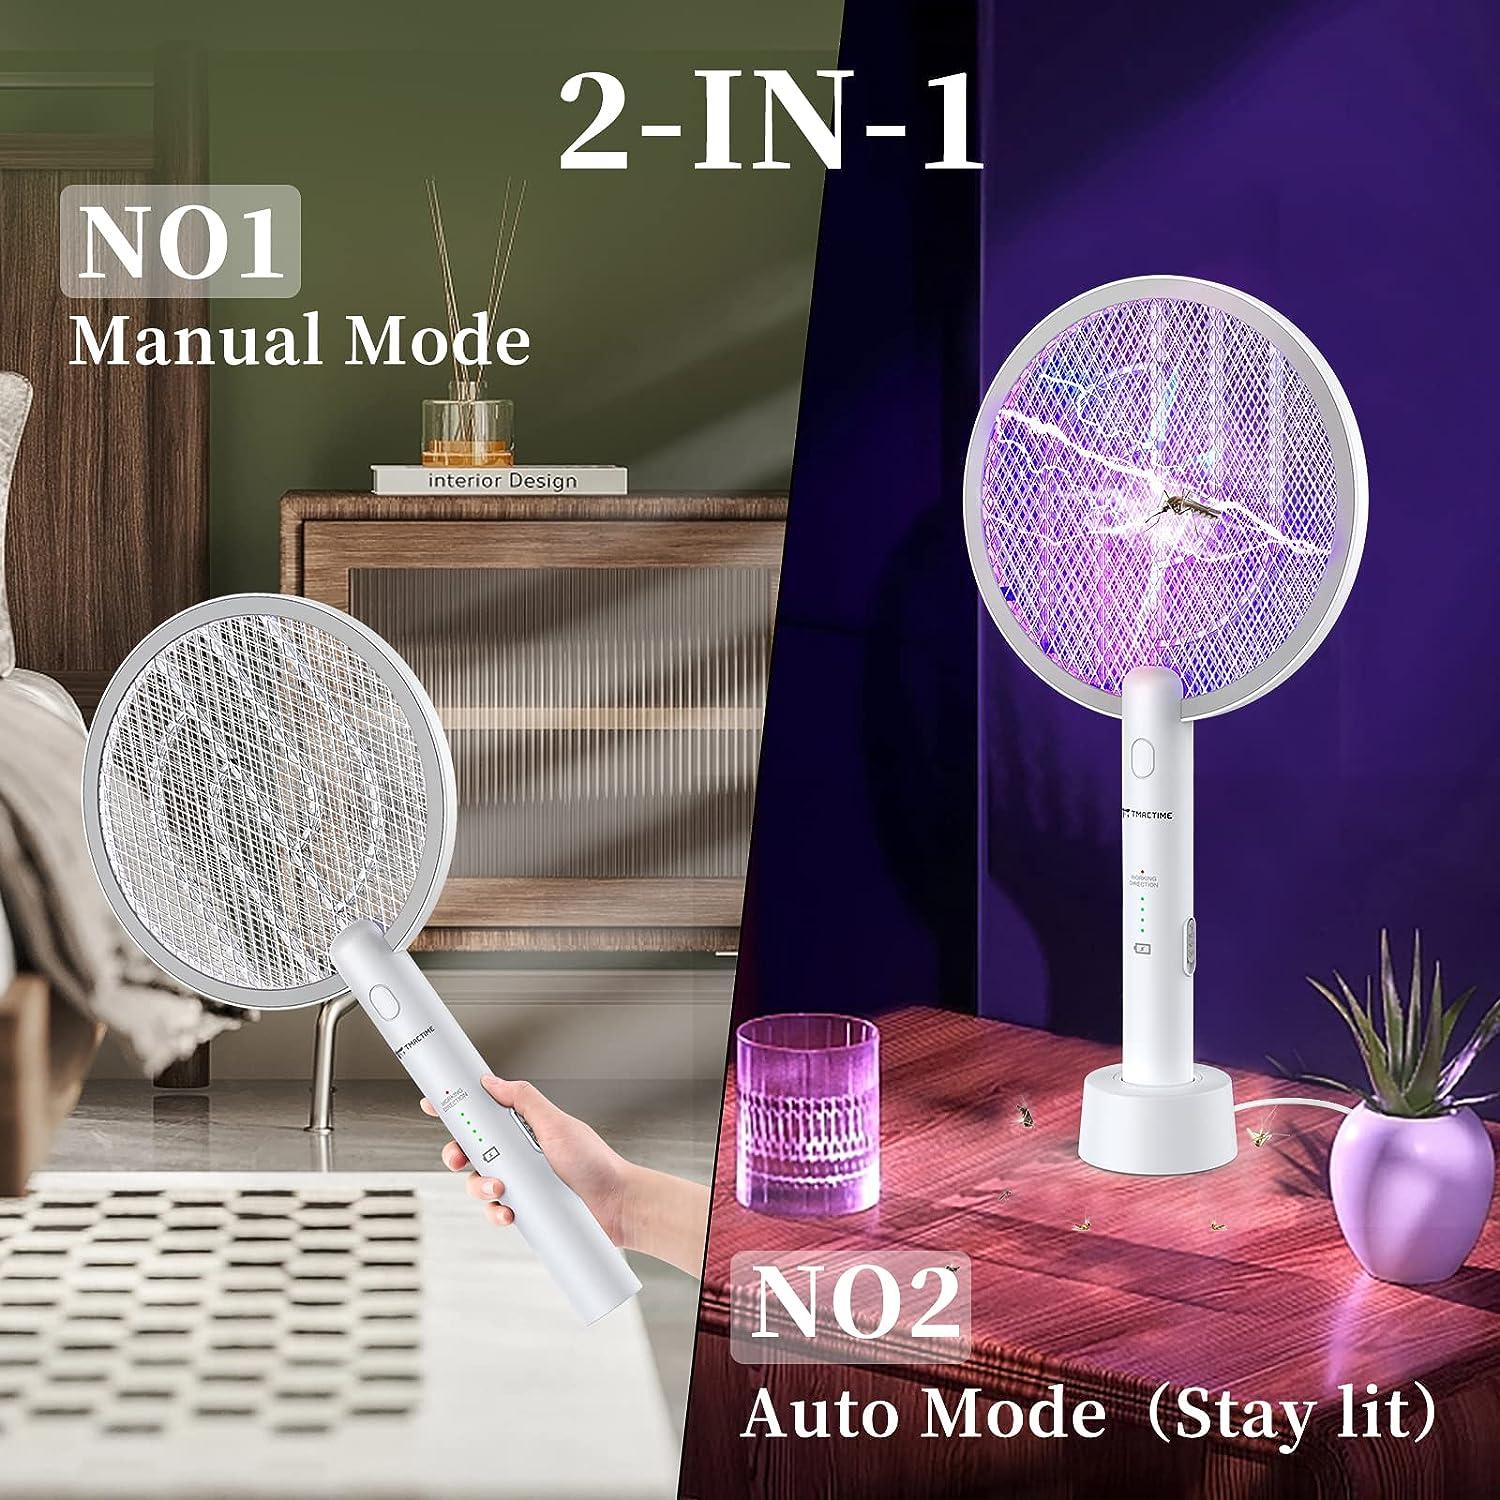 2-in-1 Zapper and Swatter- NEW DESIGN!